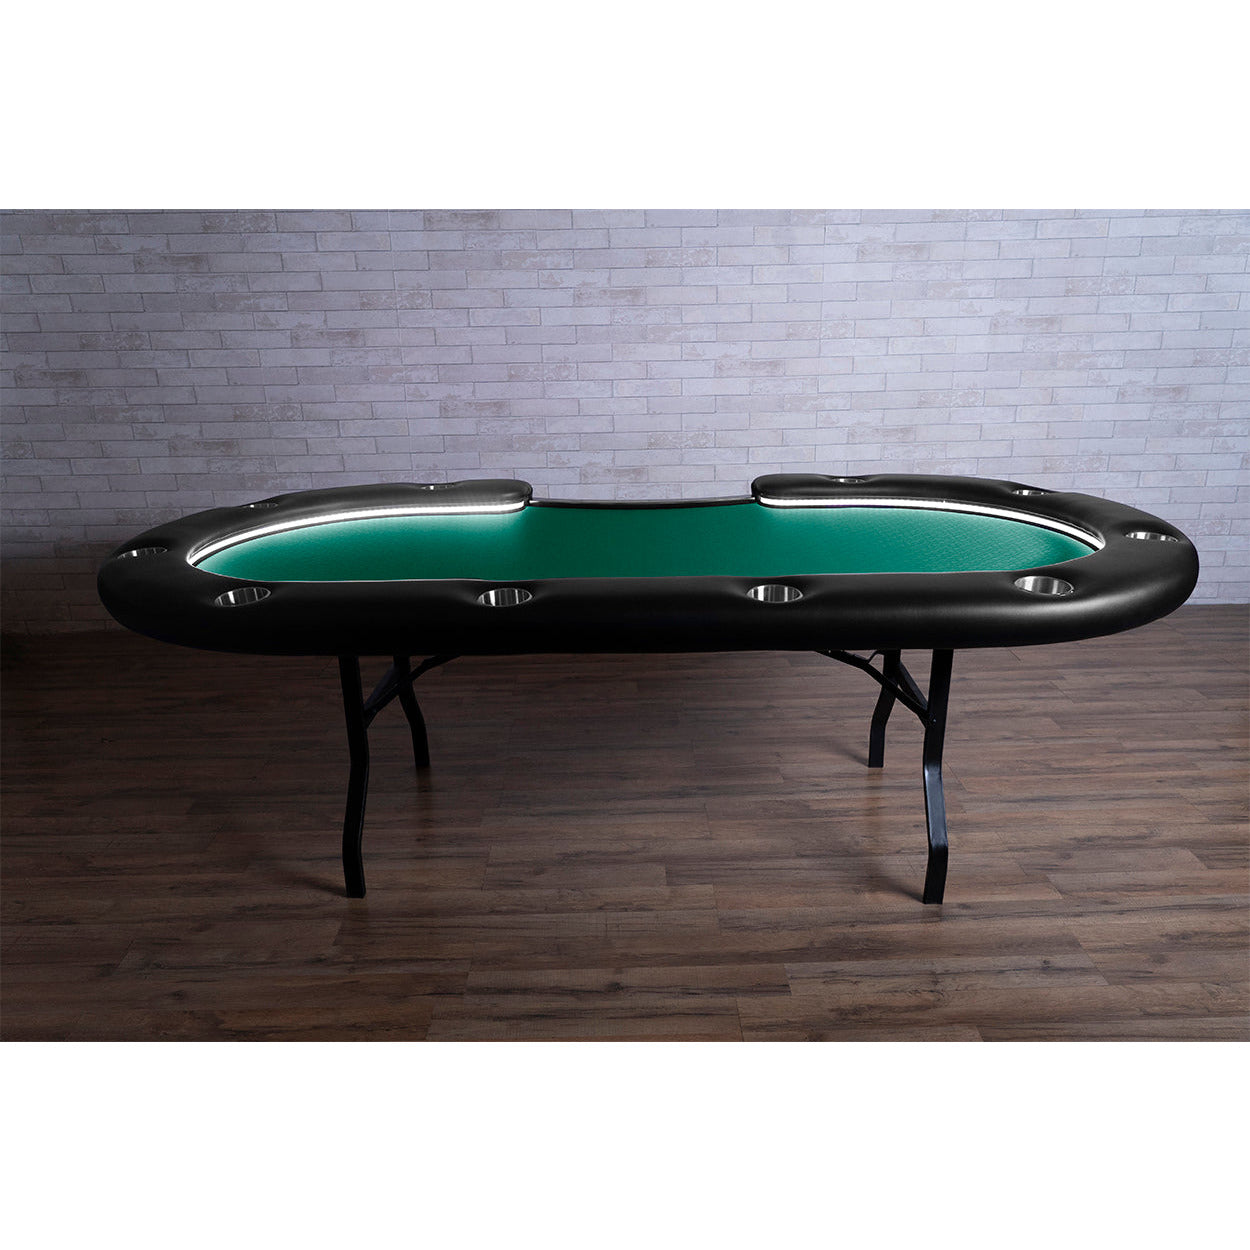 BBO The Aces Pro Alpha Folding Poker Table green speedcloth side view 